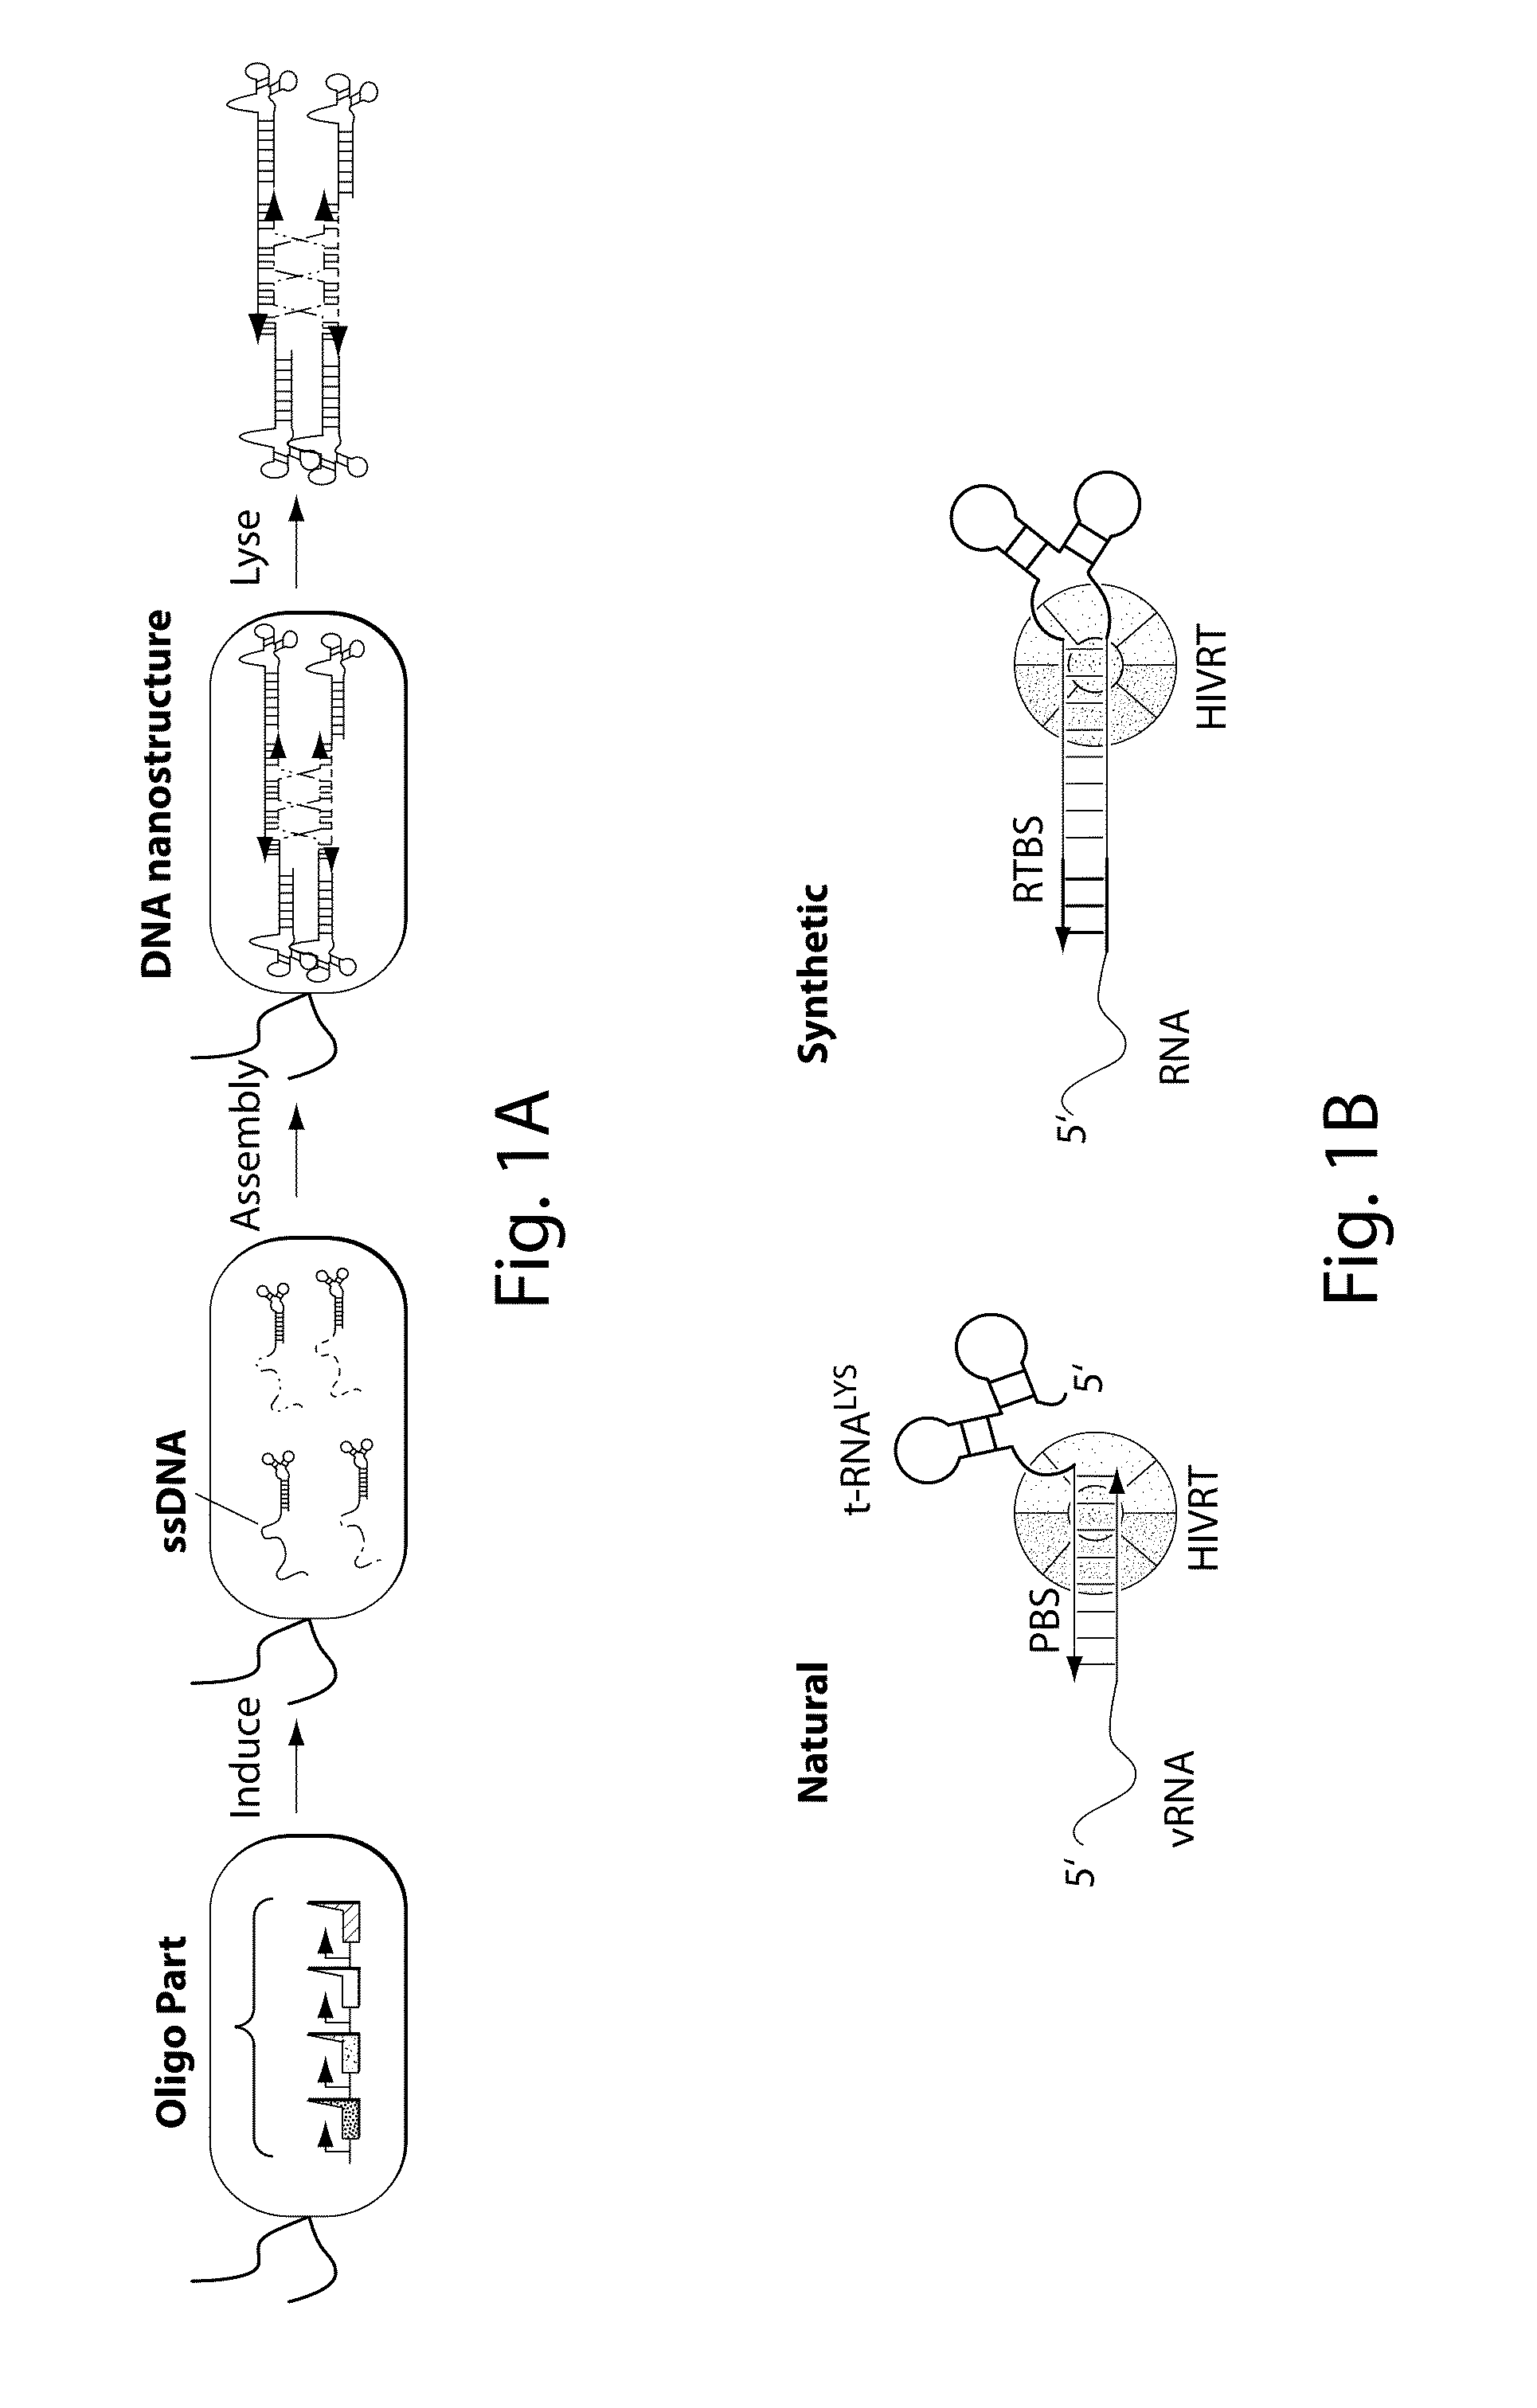 Engineering DNA assembly in vivo and methods of making and using the reverse transcriptase technology